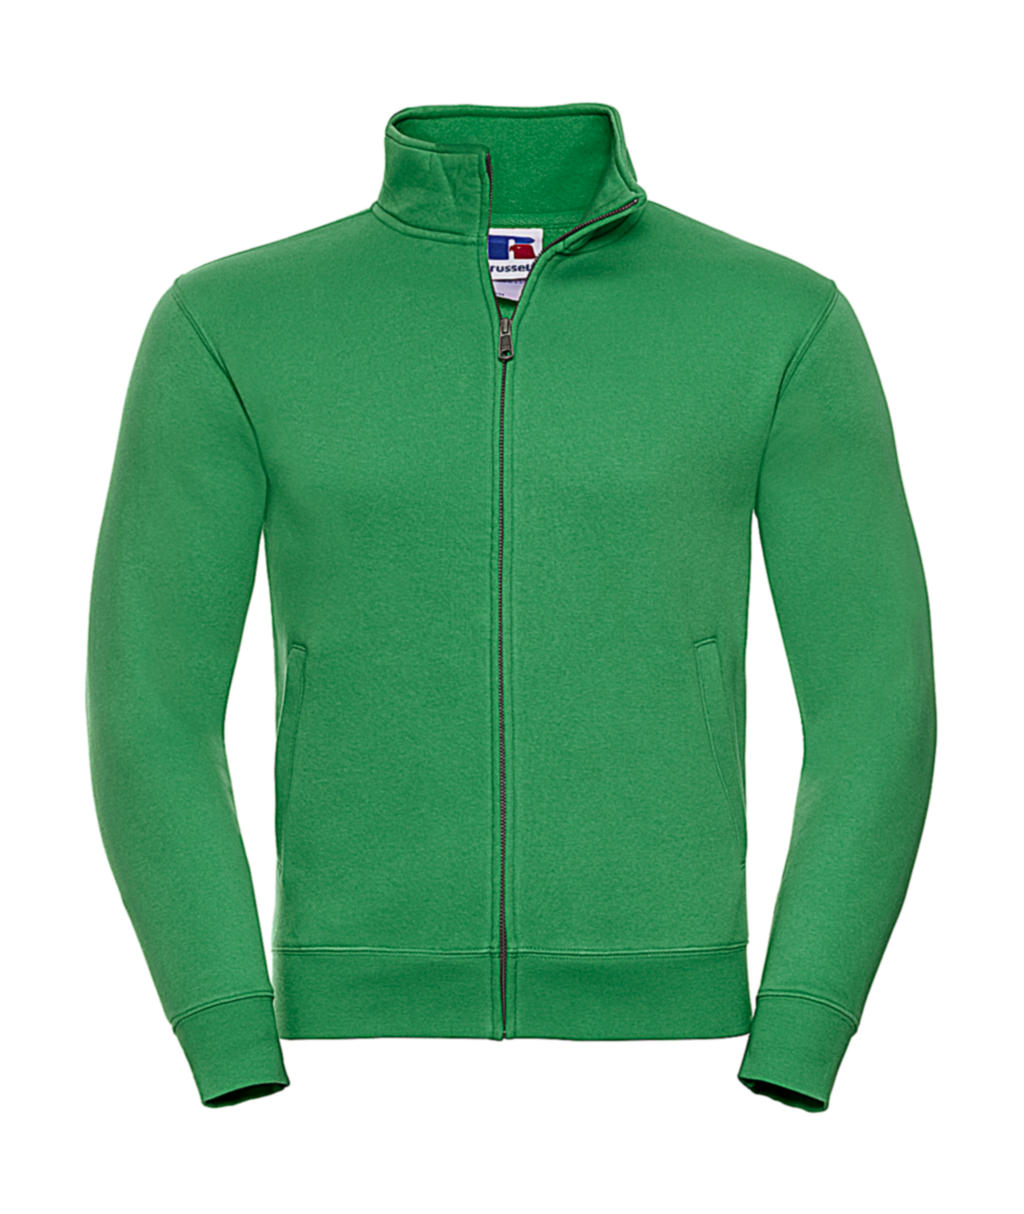  Mens Authentic Sweat Jacket in Farbe Apple